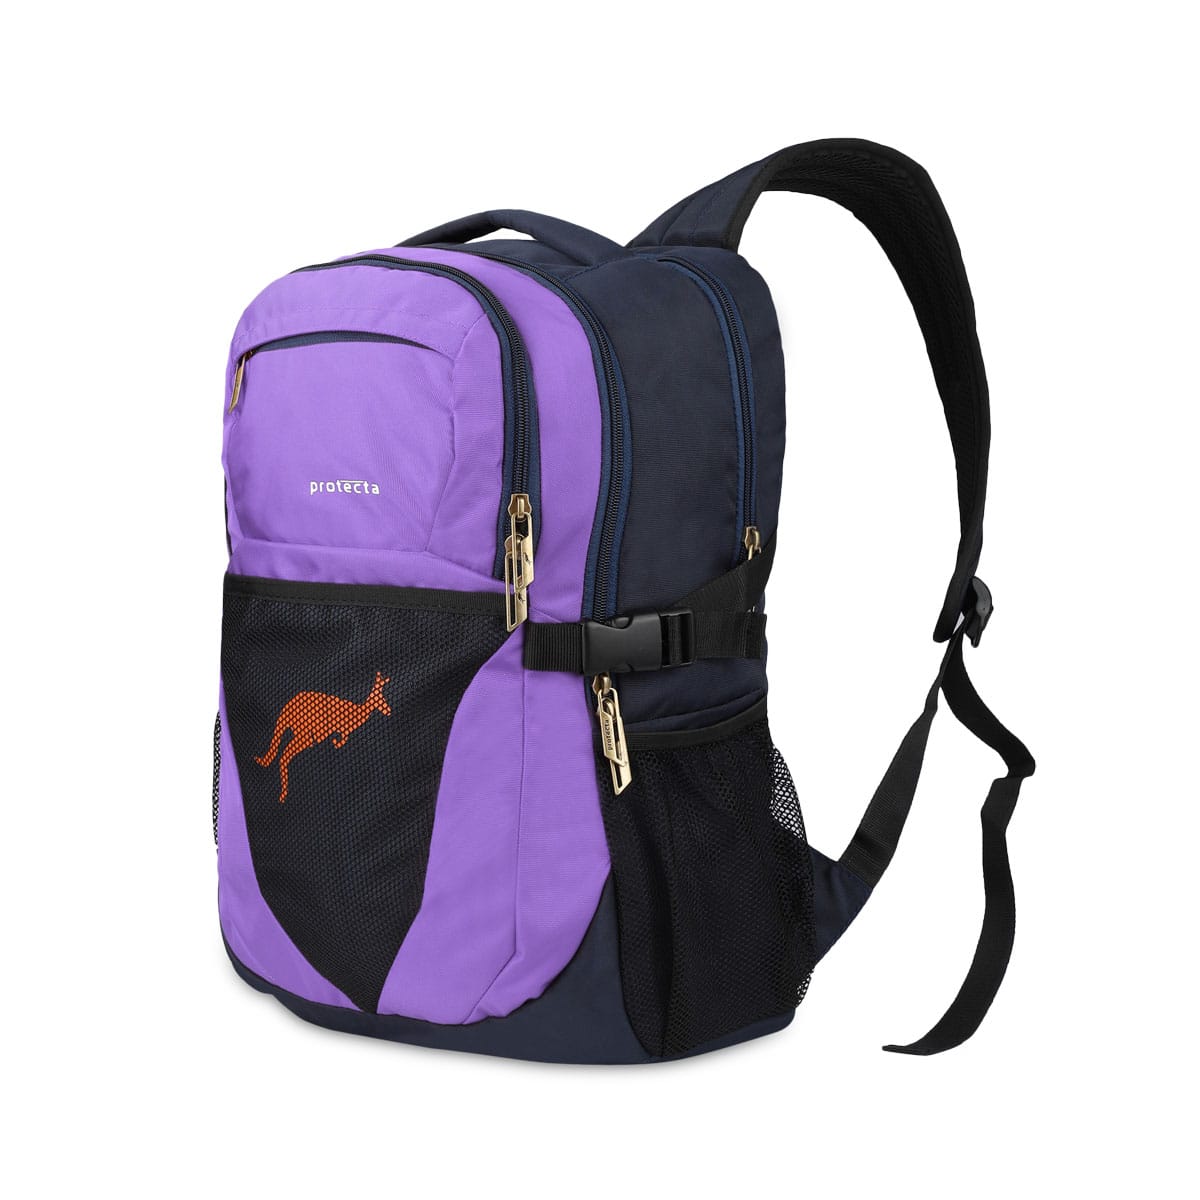 Navy-Violet | Protecta Enigma Laptop Backpack-Main